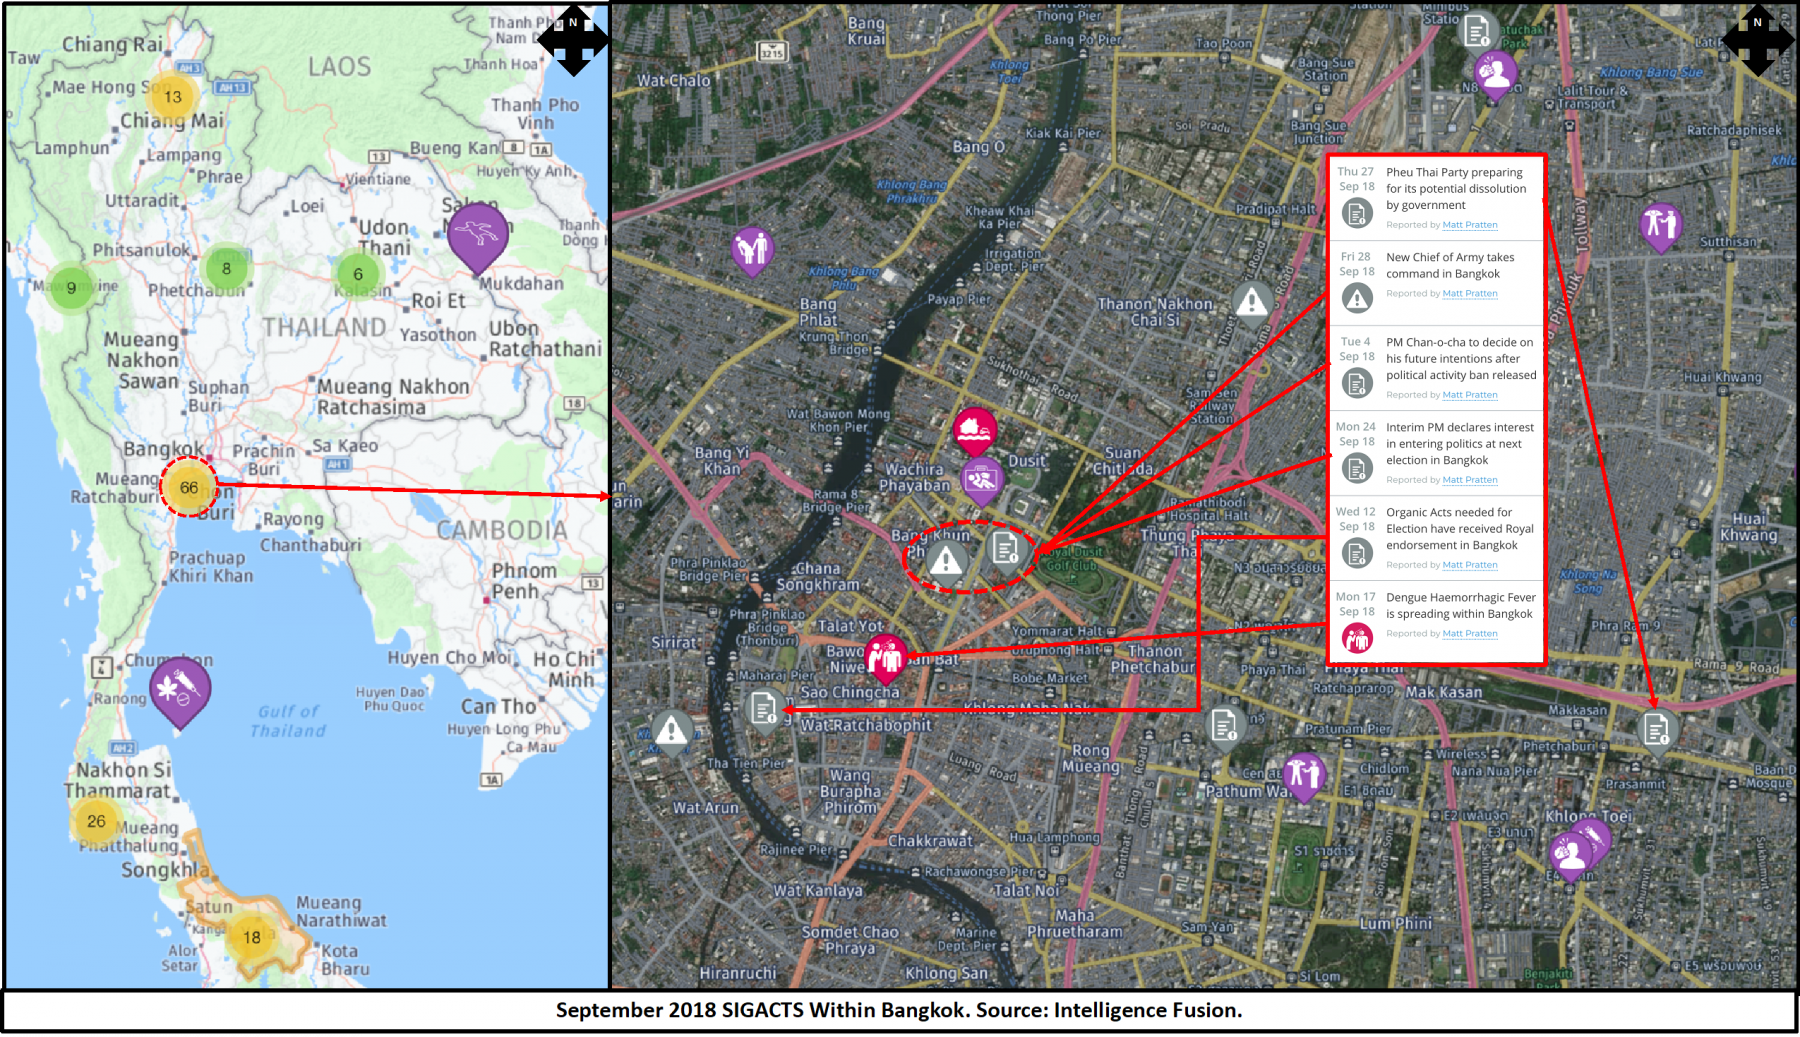 A map focusing on the significant criminal activity in Bangkok, Thailand during September 2018